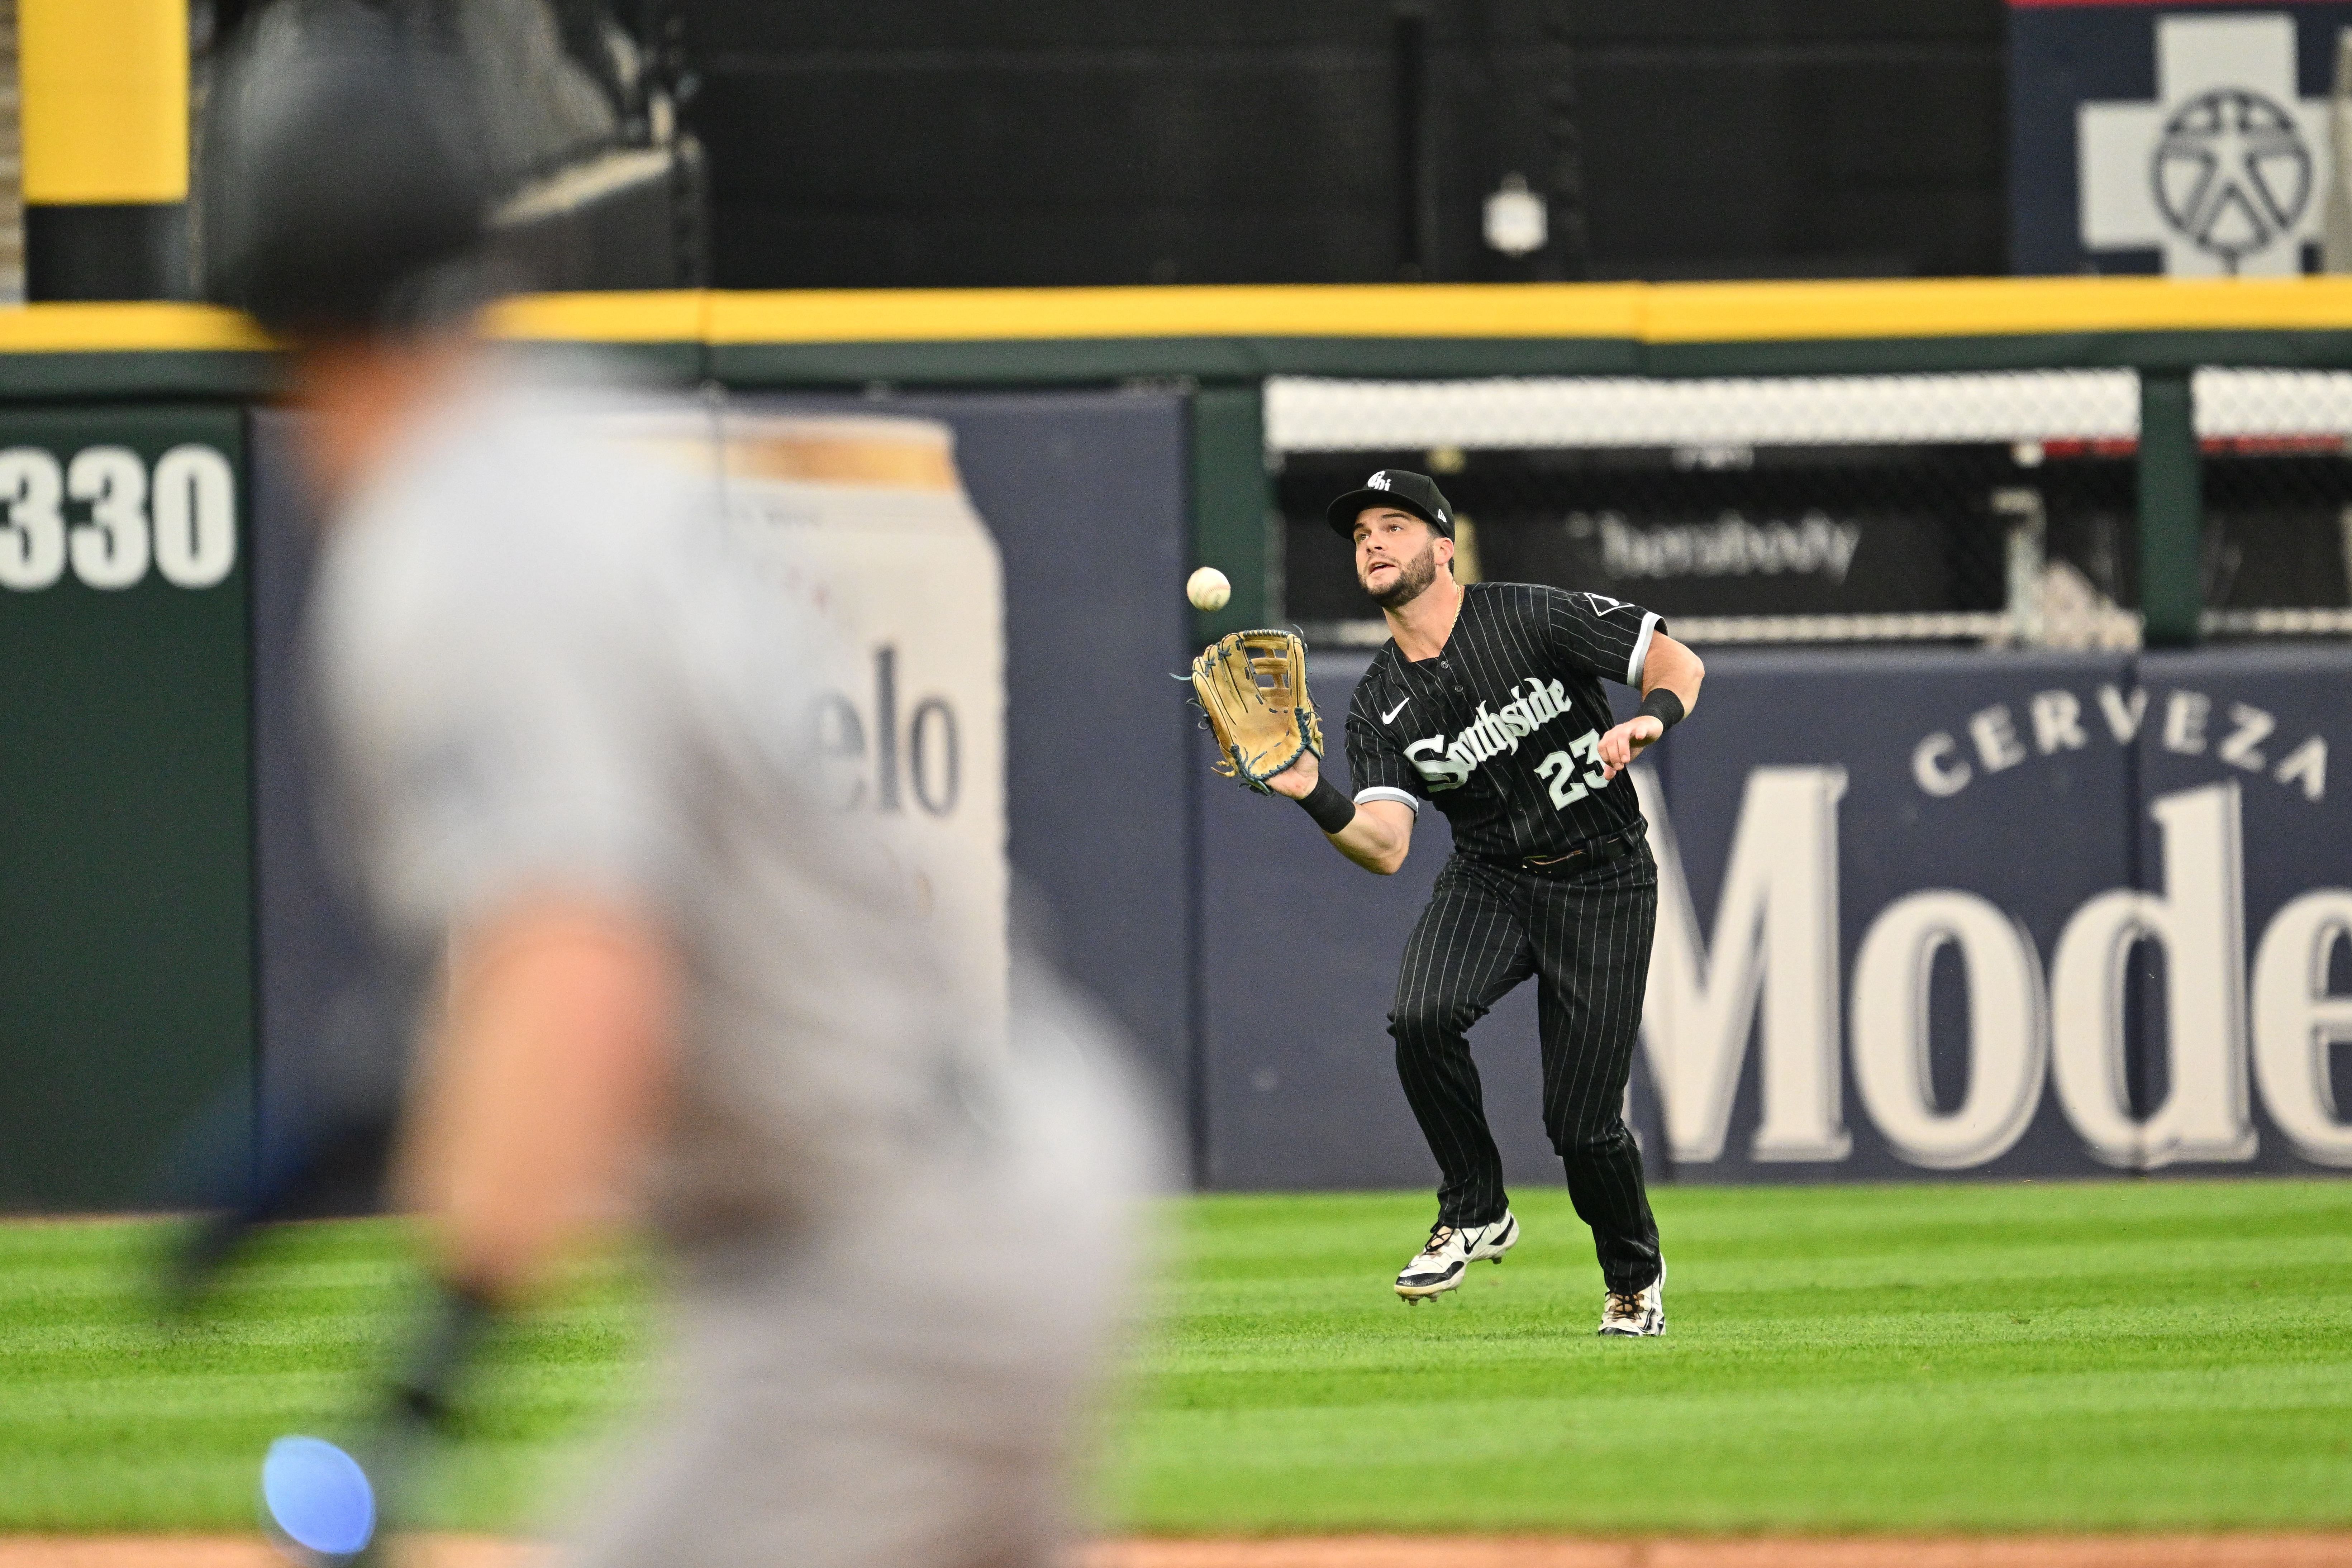 White Sox defeat struggling Yankees for 3rd straight win